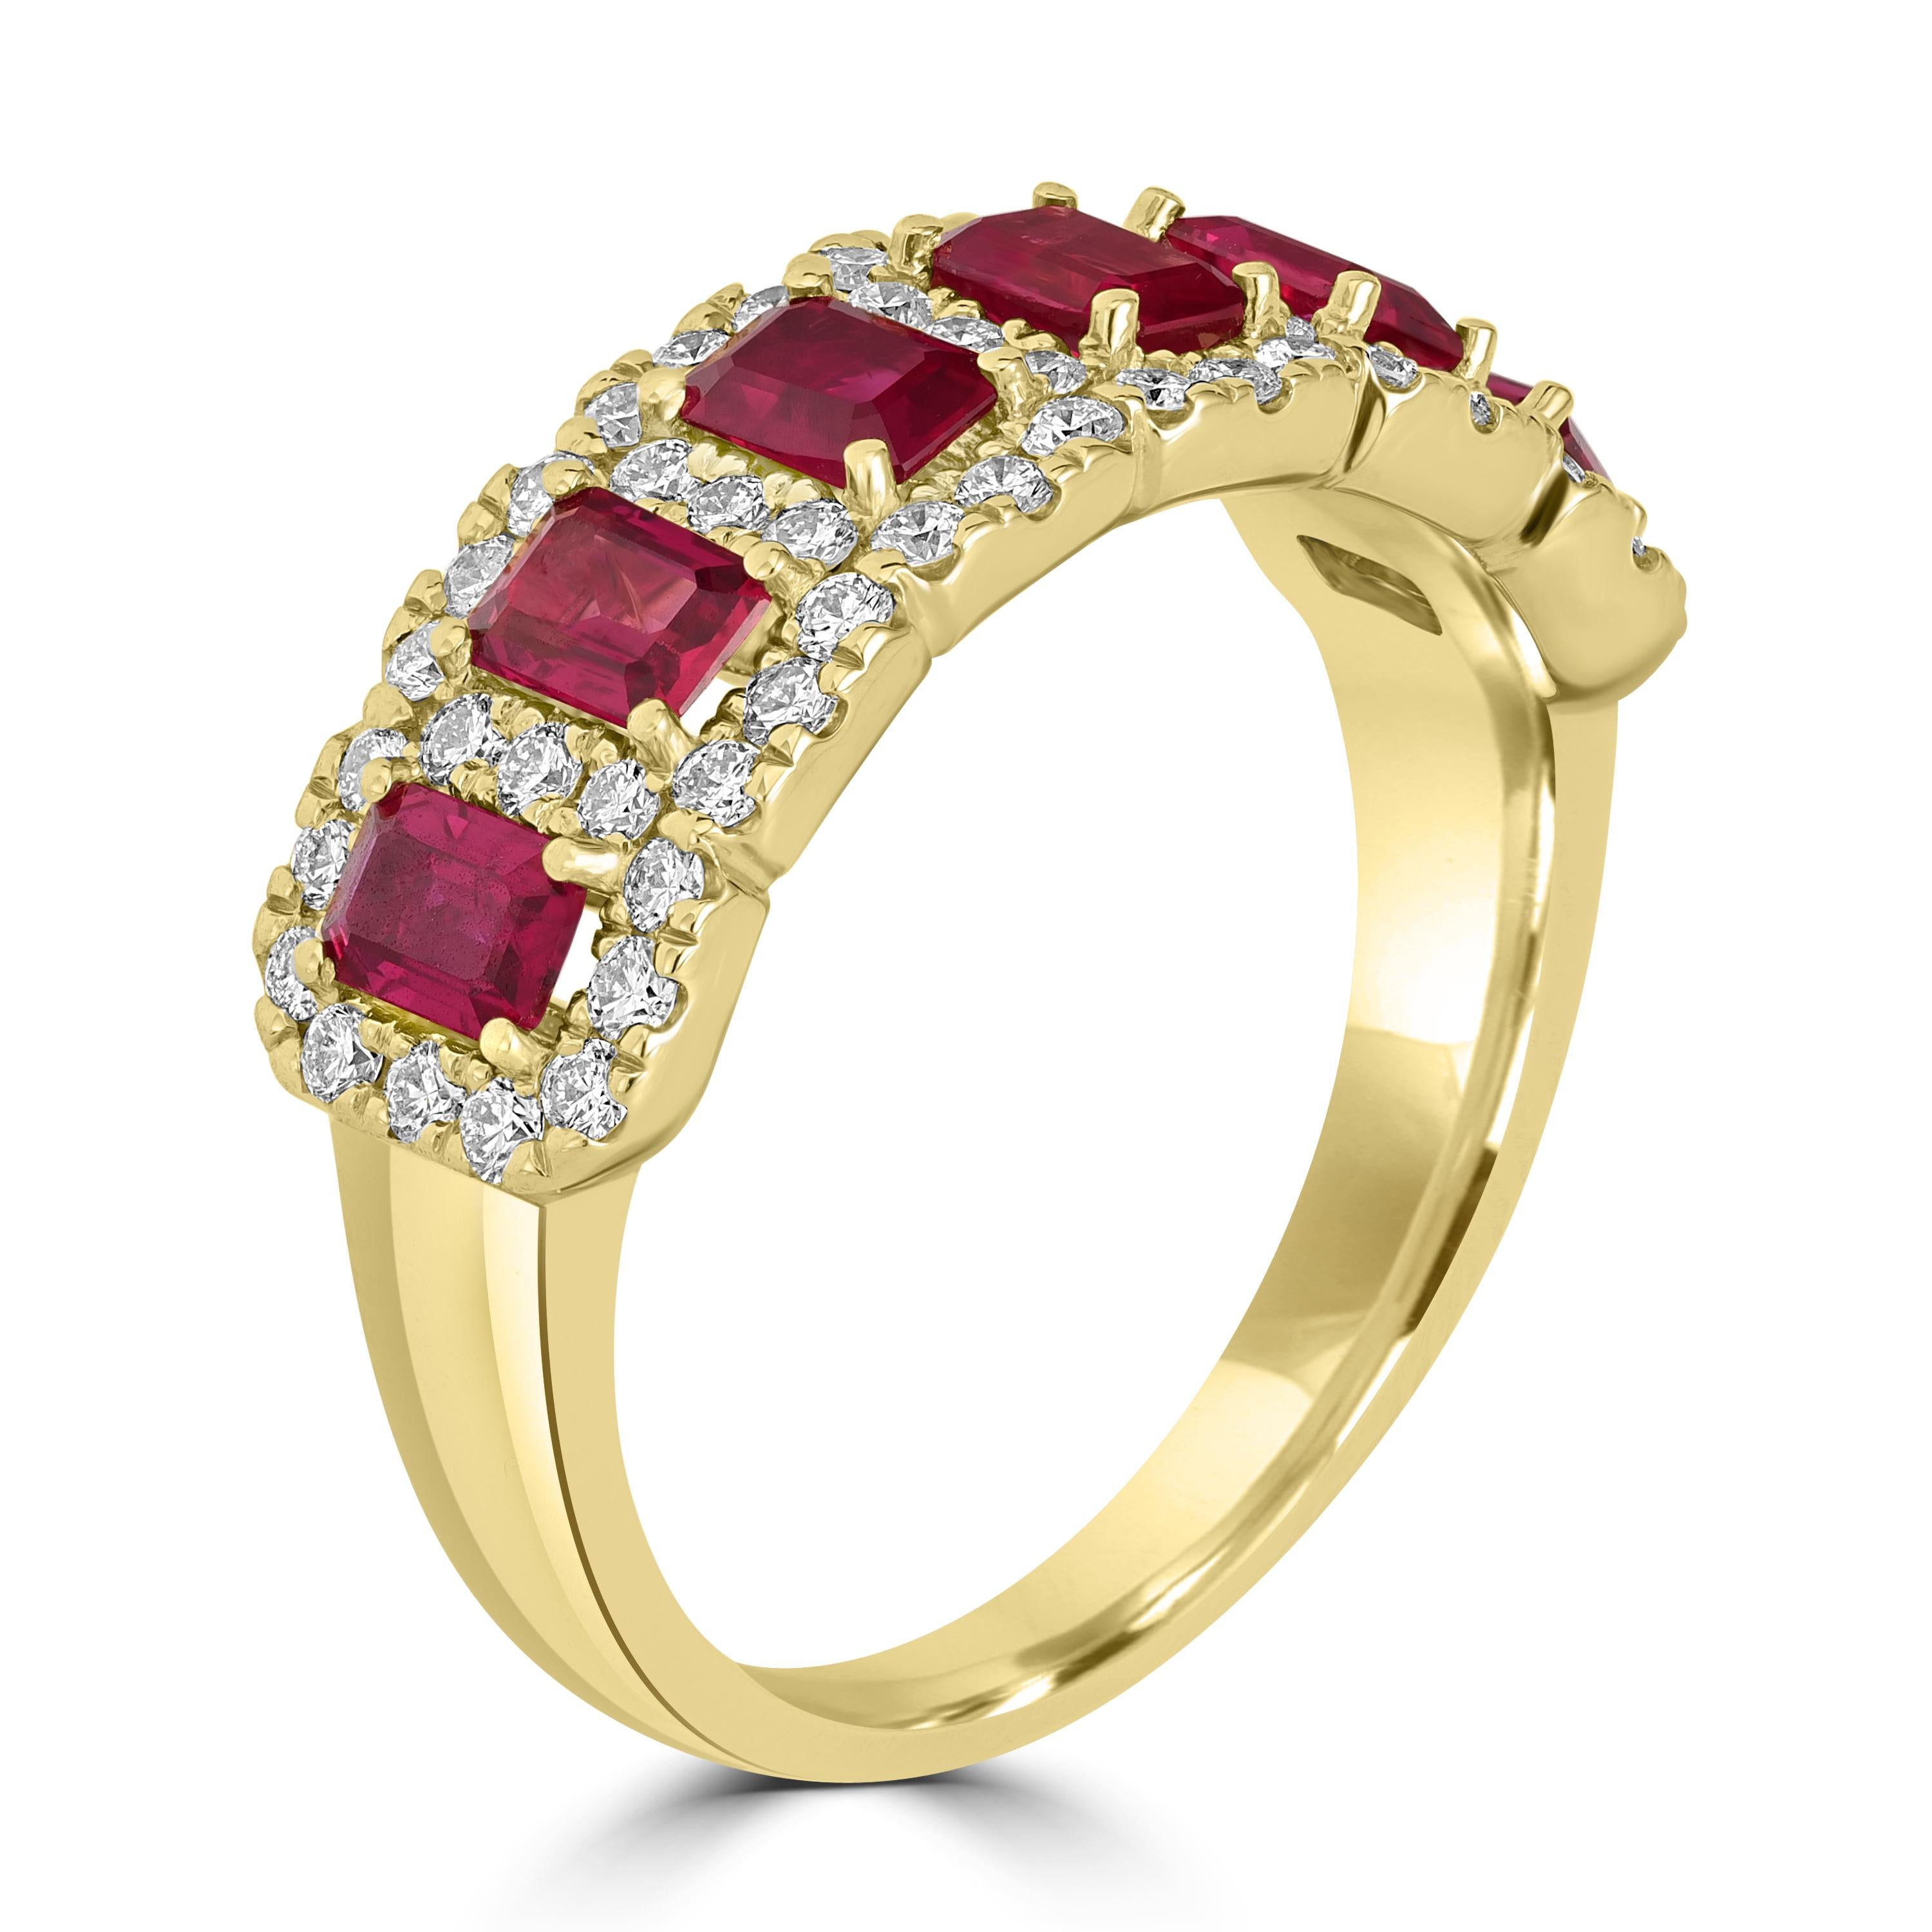 Elevate your style with our exquisite 1.76 Carat Emerald Cut Ruby Half Eternity Ring Band, delicately adorned with diamonds, set in radiant 18k yellow gold.

Crafted to captivate, this stunning ring features a row of sumptuous emerald-cut rubies,